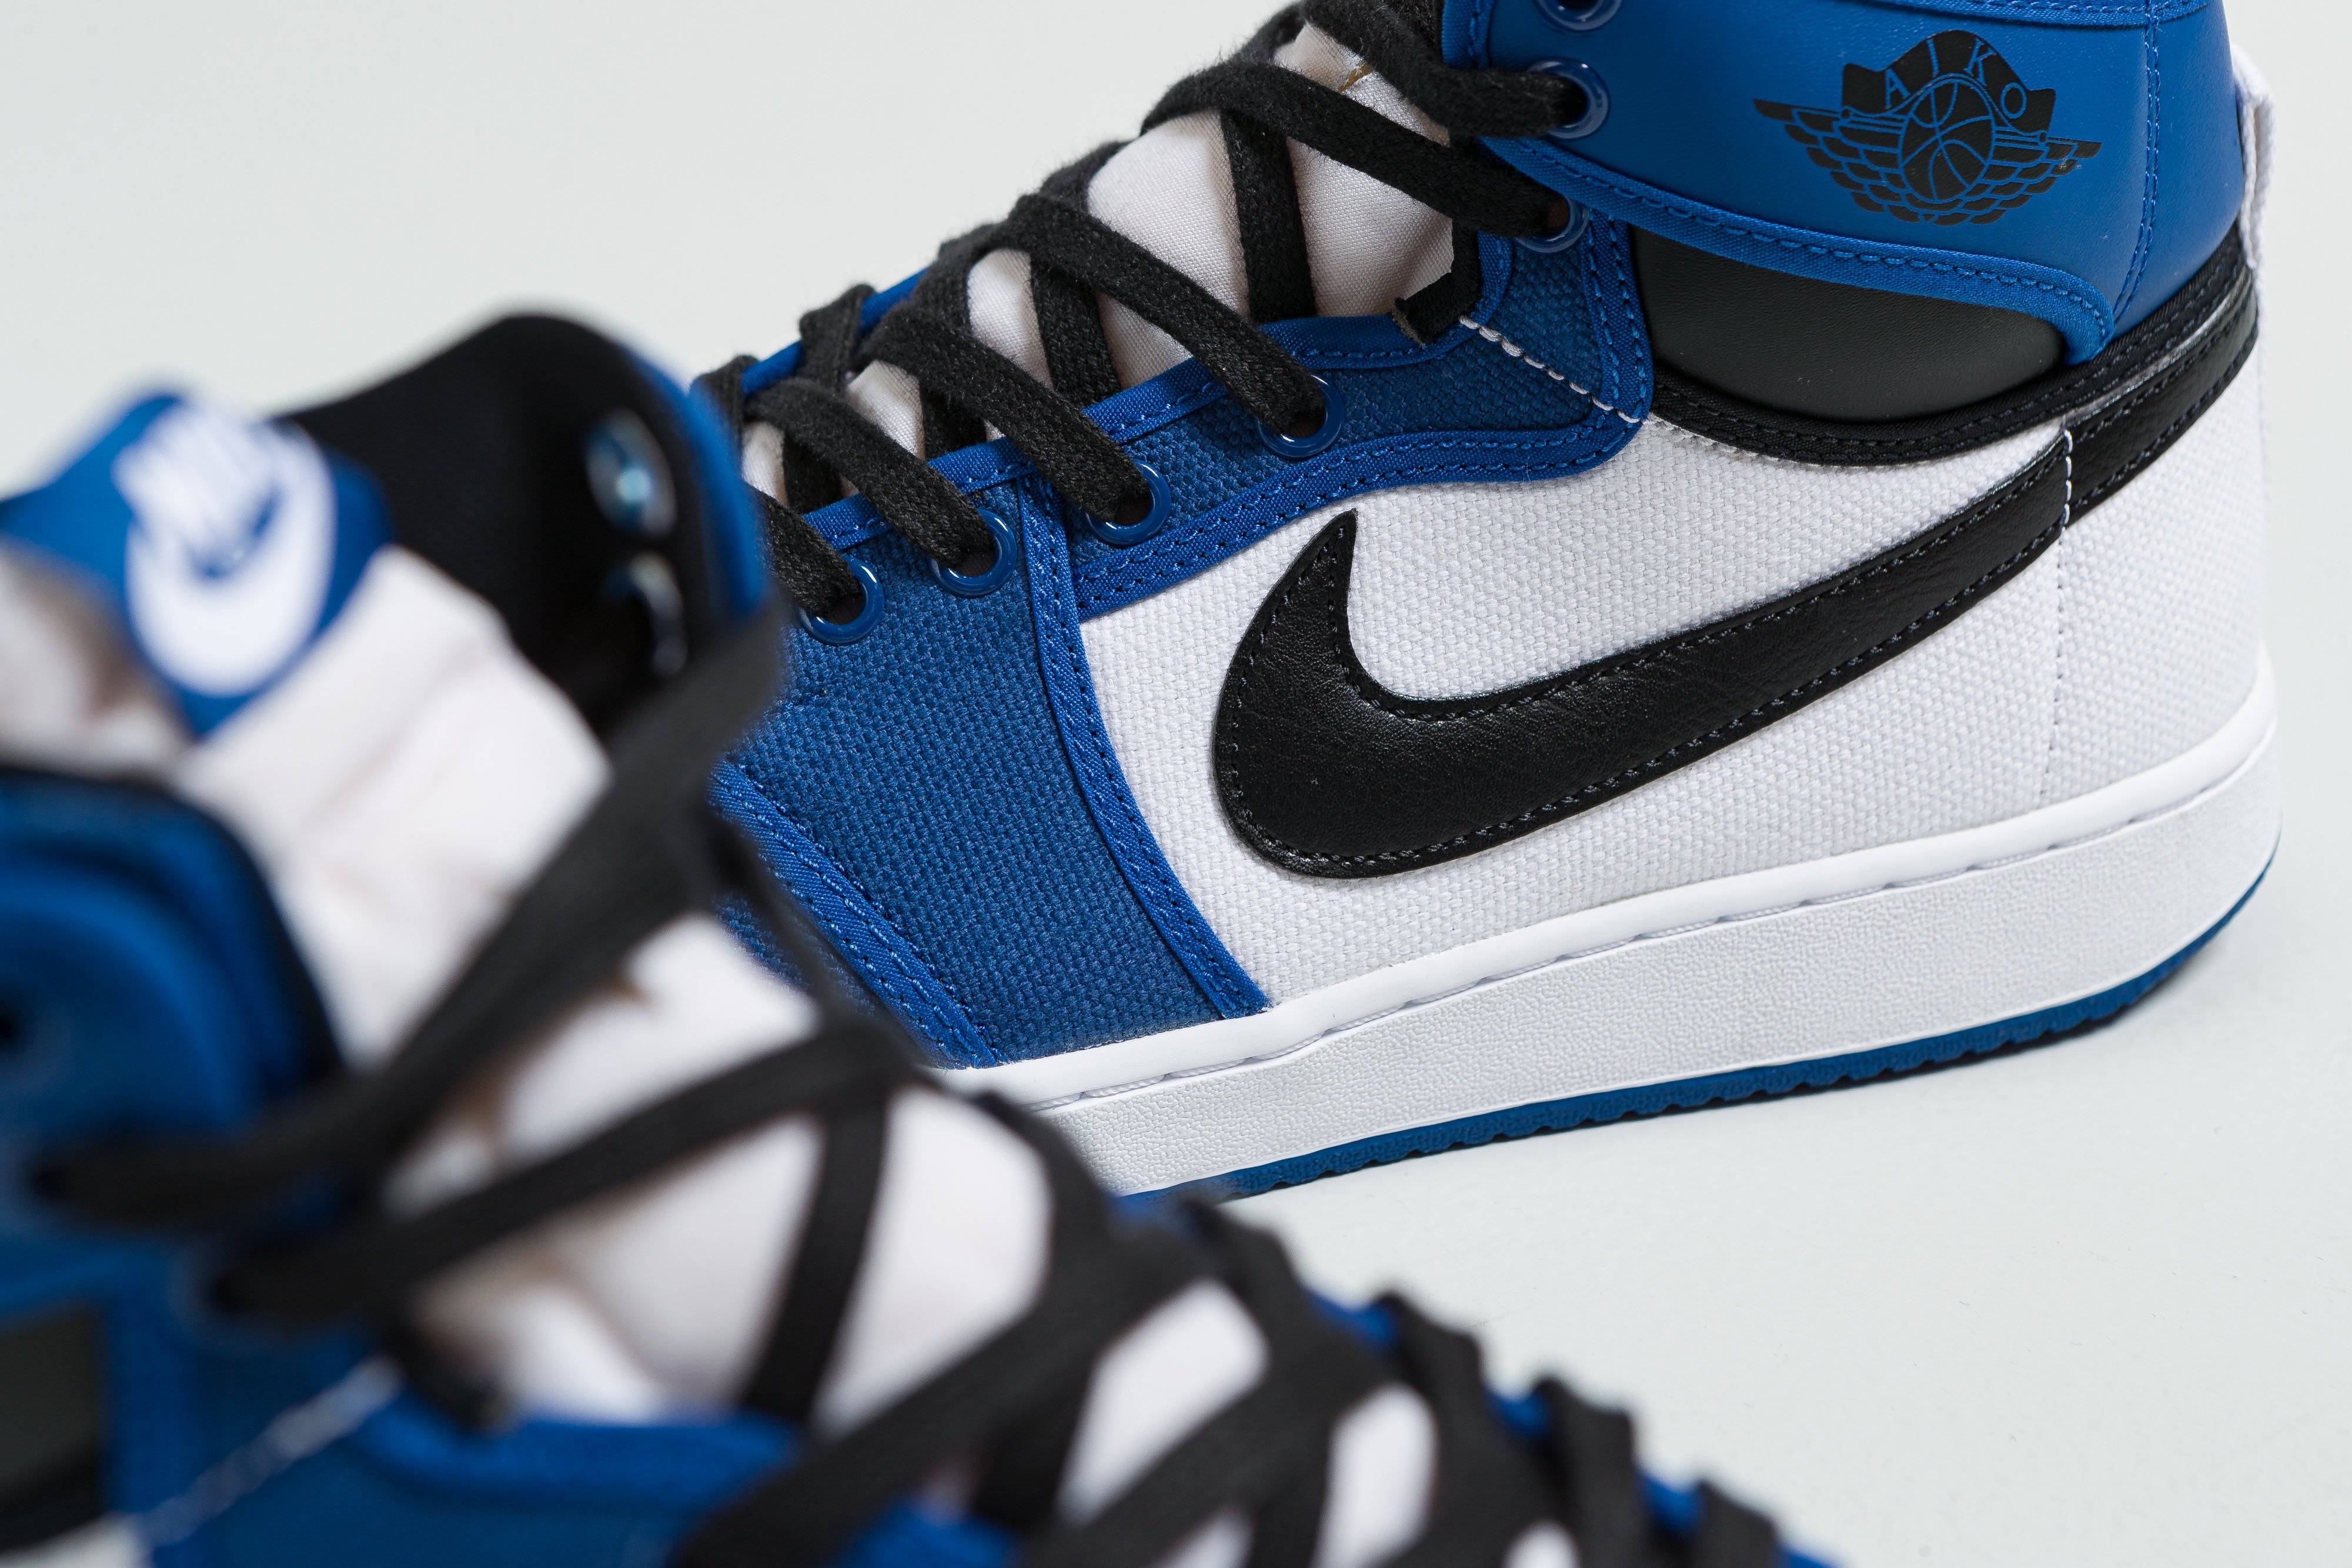 Up There Launches - Nike Air Jordan 1 KO 'Storm Blue’